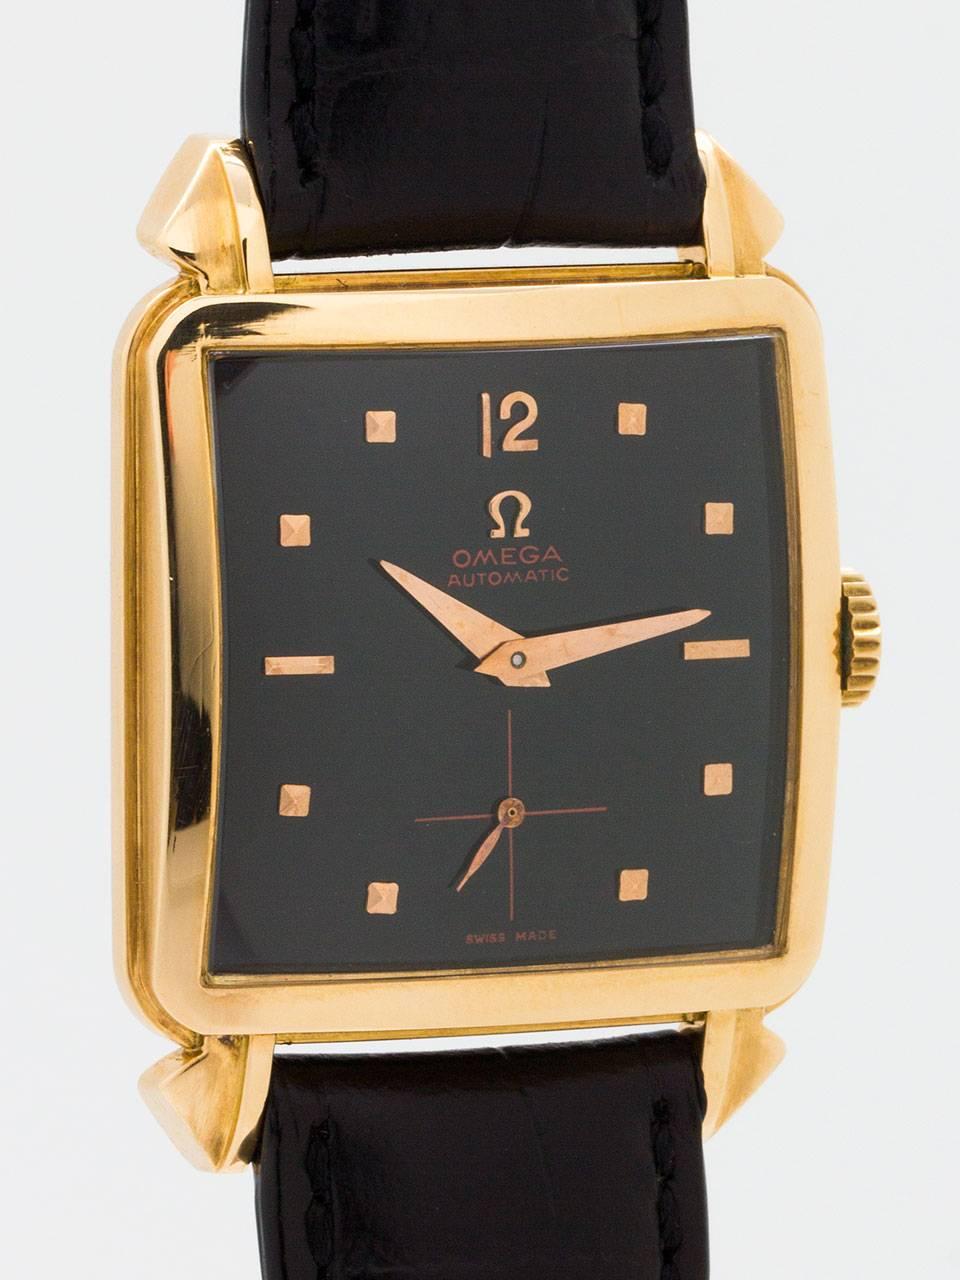 Great looking oversize Omega 14K Rose Gold square case automatic circa 1950’s with large extended lobed lugs. Featuring very large for the era 33 X 42mm case with glass crystal and stylized lugs. Professionally restored glossy black dial with